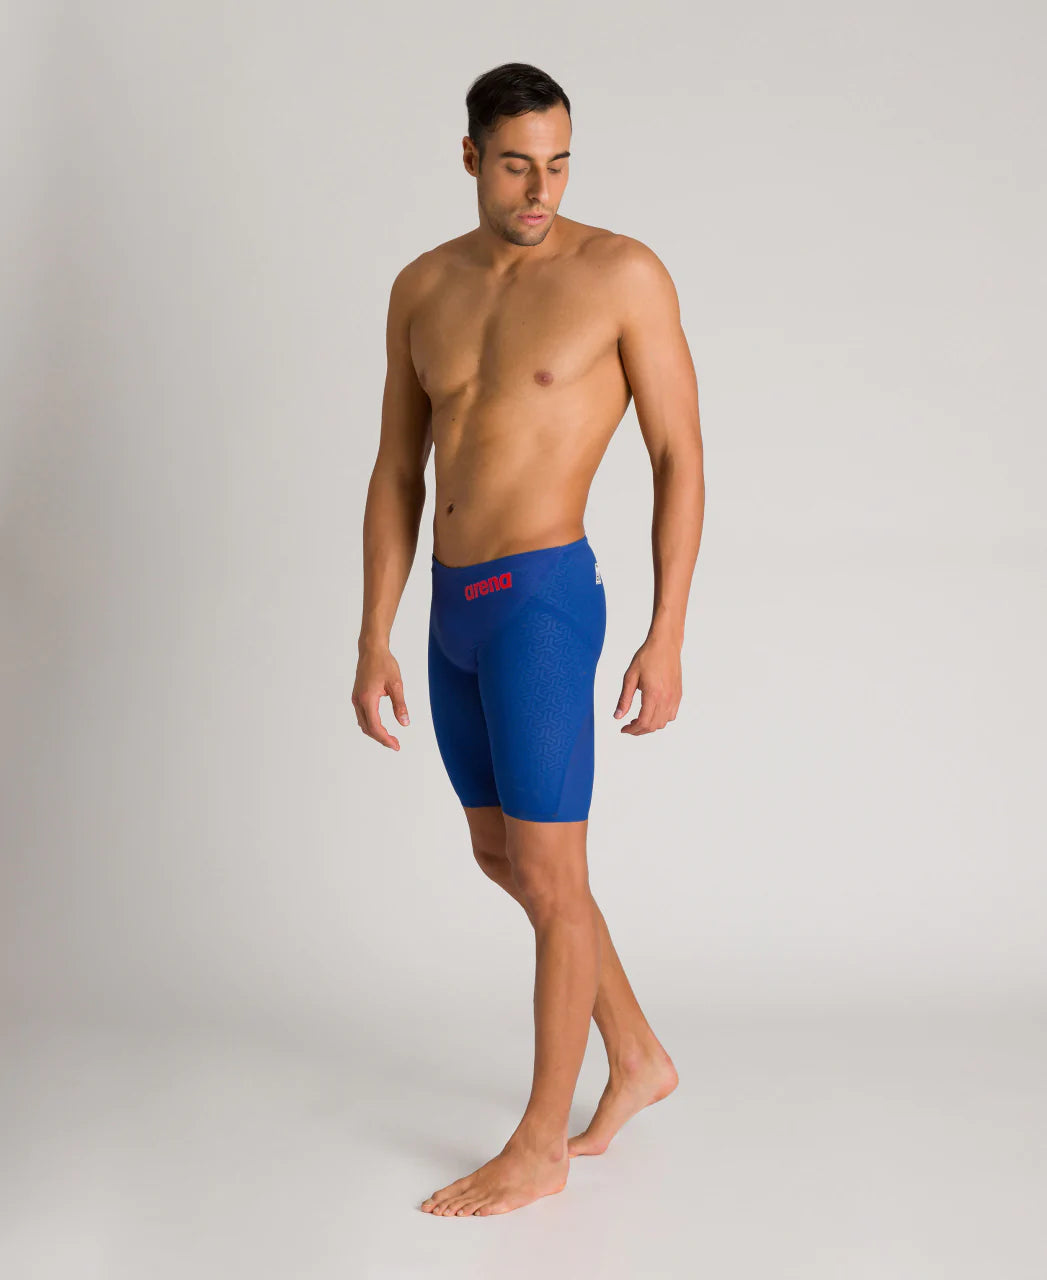 INTERSPORT Egypt - The new Arena Powerskin Carbon Flex VX Jammer designed  for long distances, It is the ideal suit for backstroke, breaststroke and  individual medley. It has features that make it